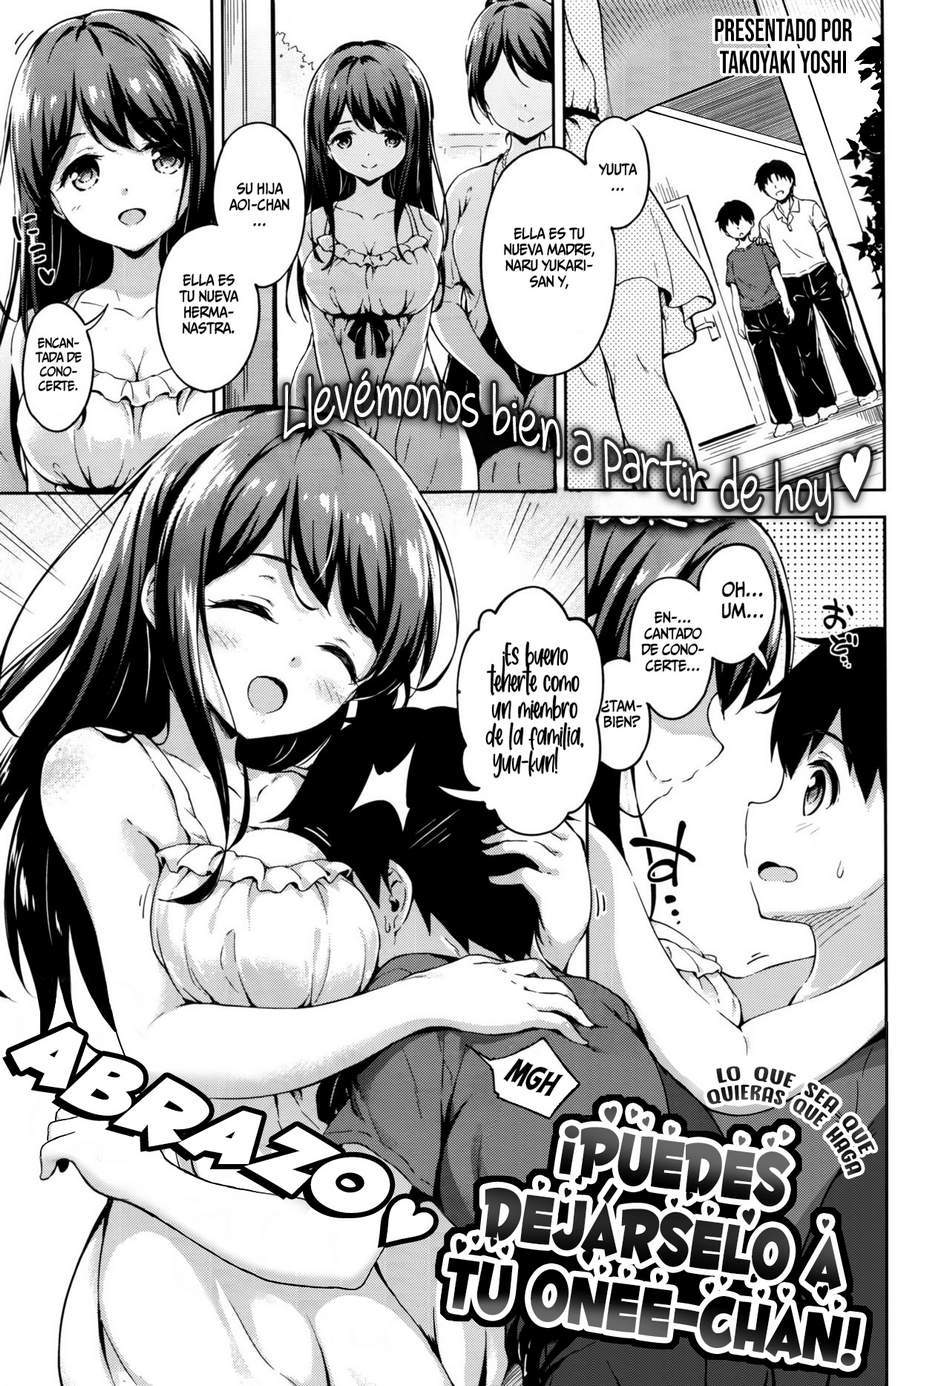 ¡Puedes dejárselo a tu onee-chan! - Page #1